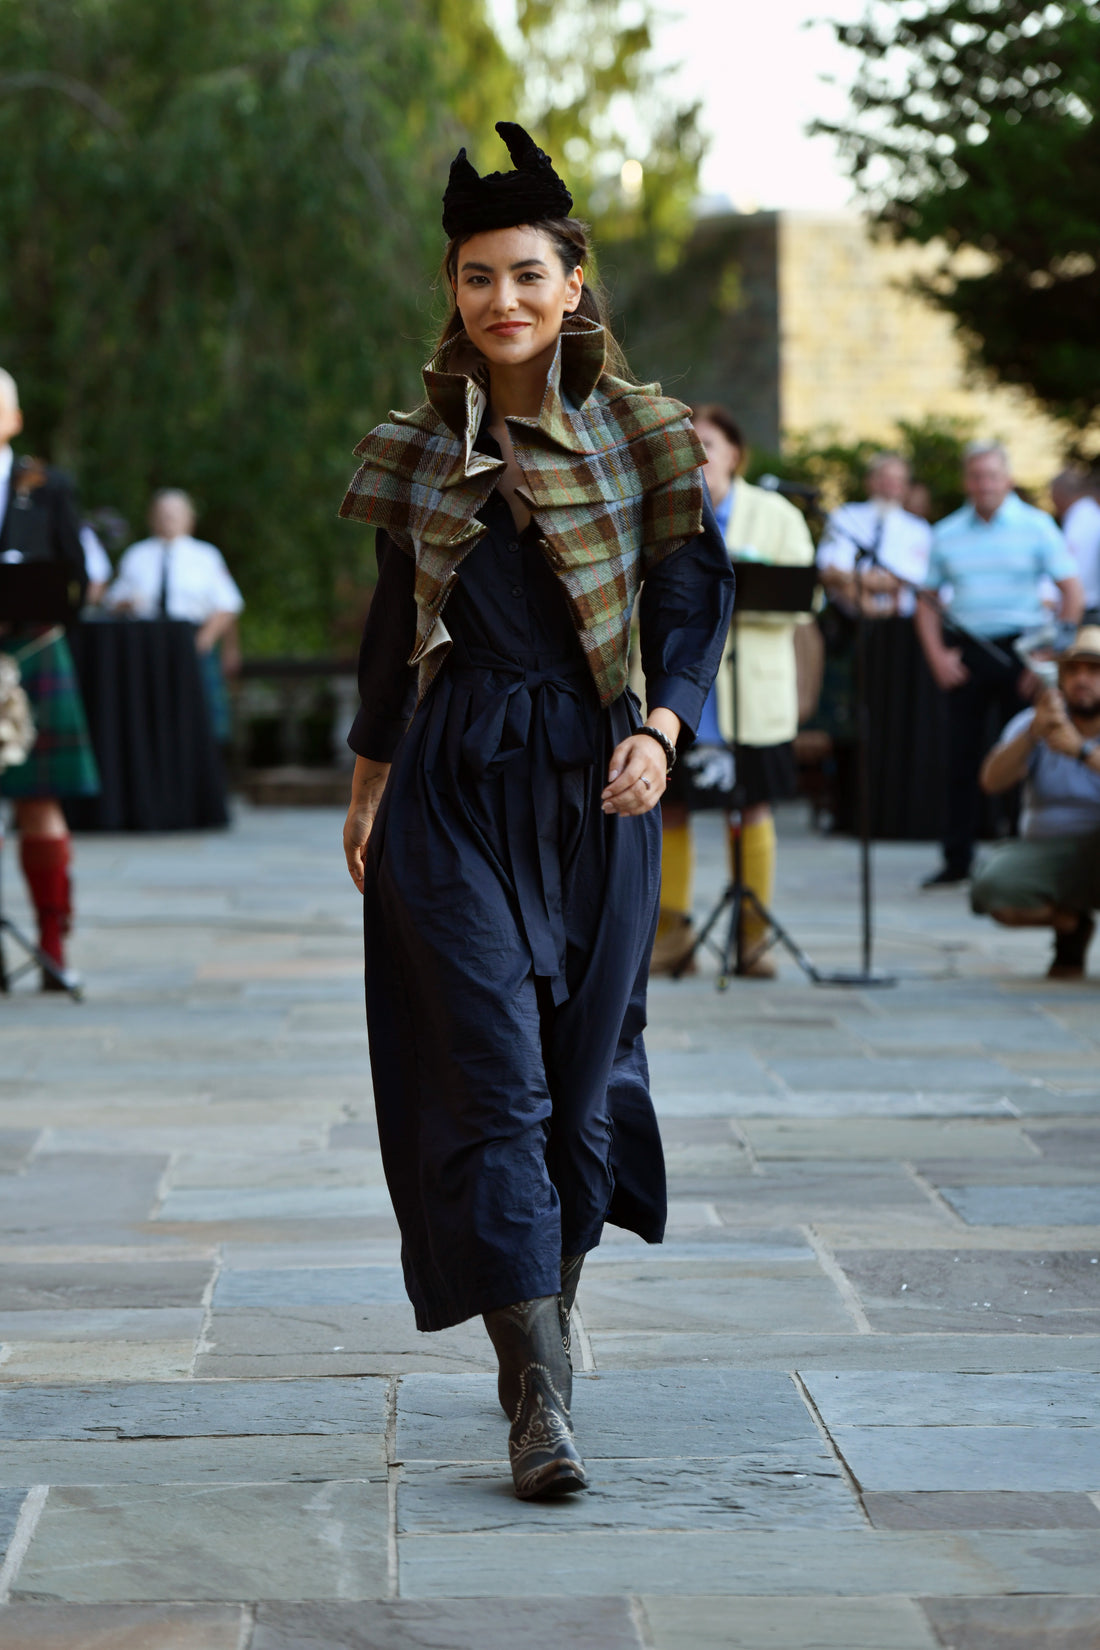 Scottish Field - DRESSED TO KILT: DON’T MISS THESE FASHION PHOTOS